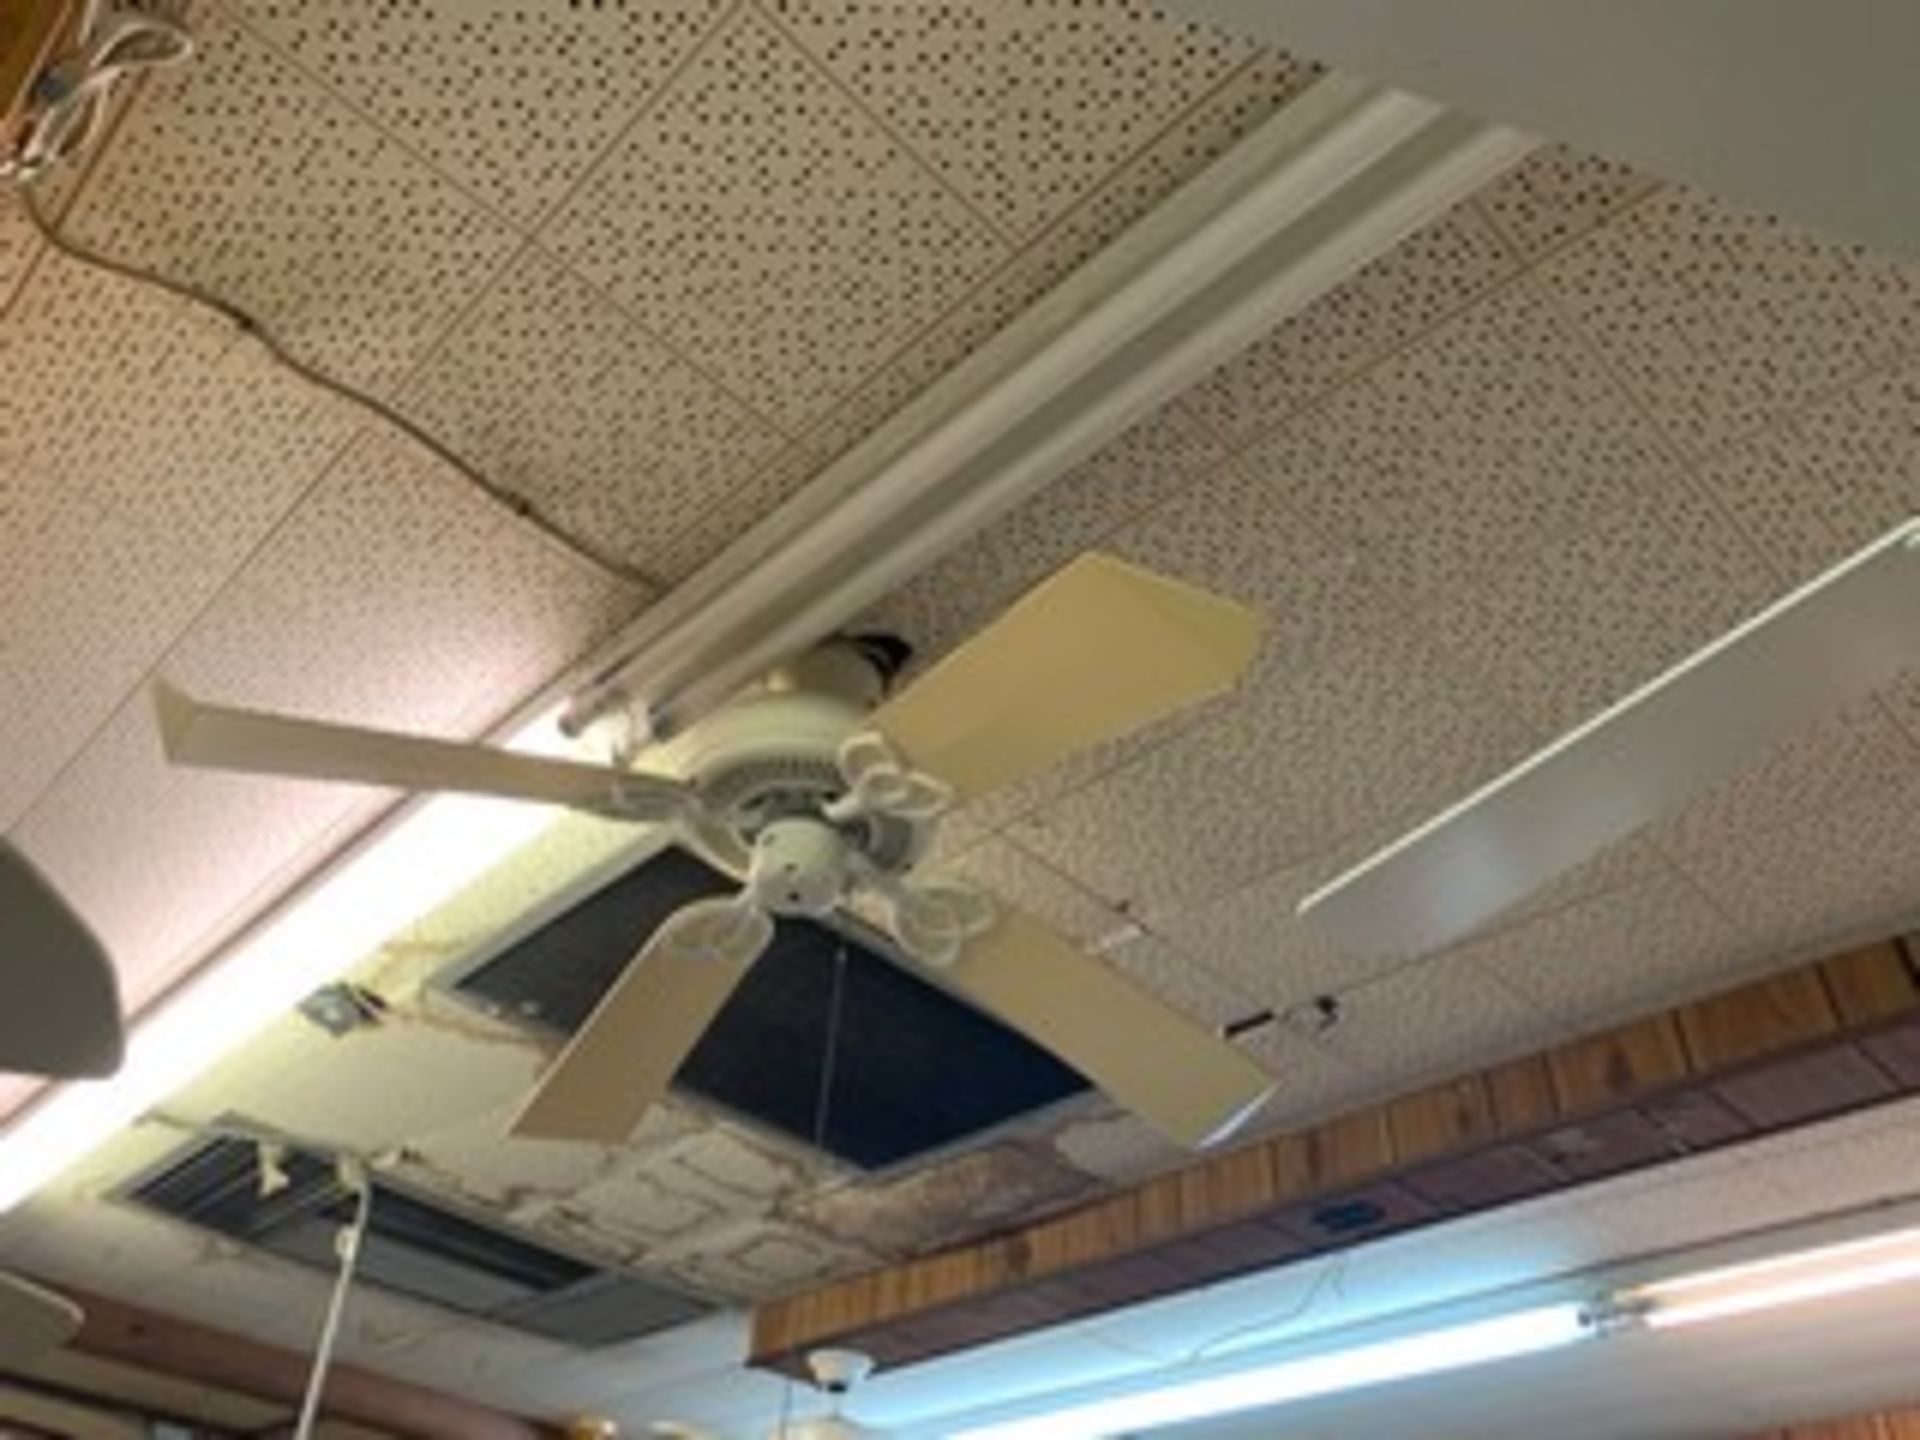 ASSORTED CEILING FANS - WHITE / OFF-WHITE - Image 2 of 4